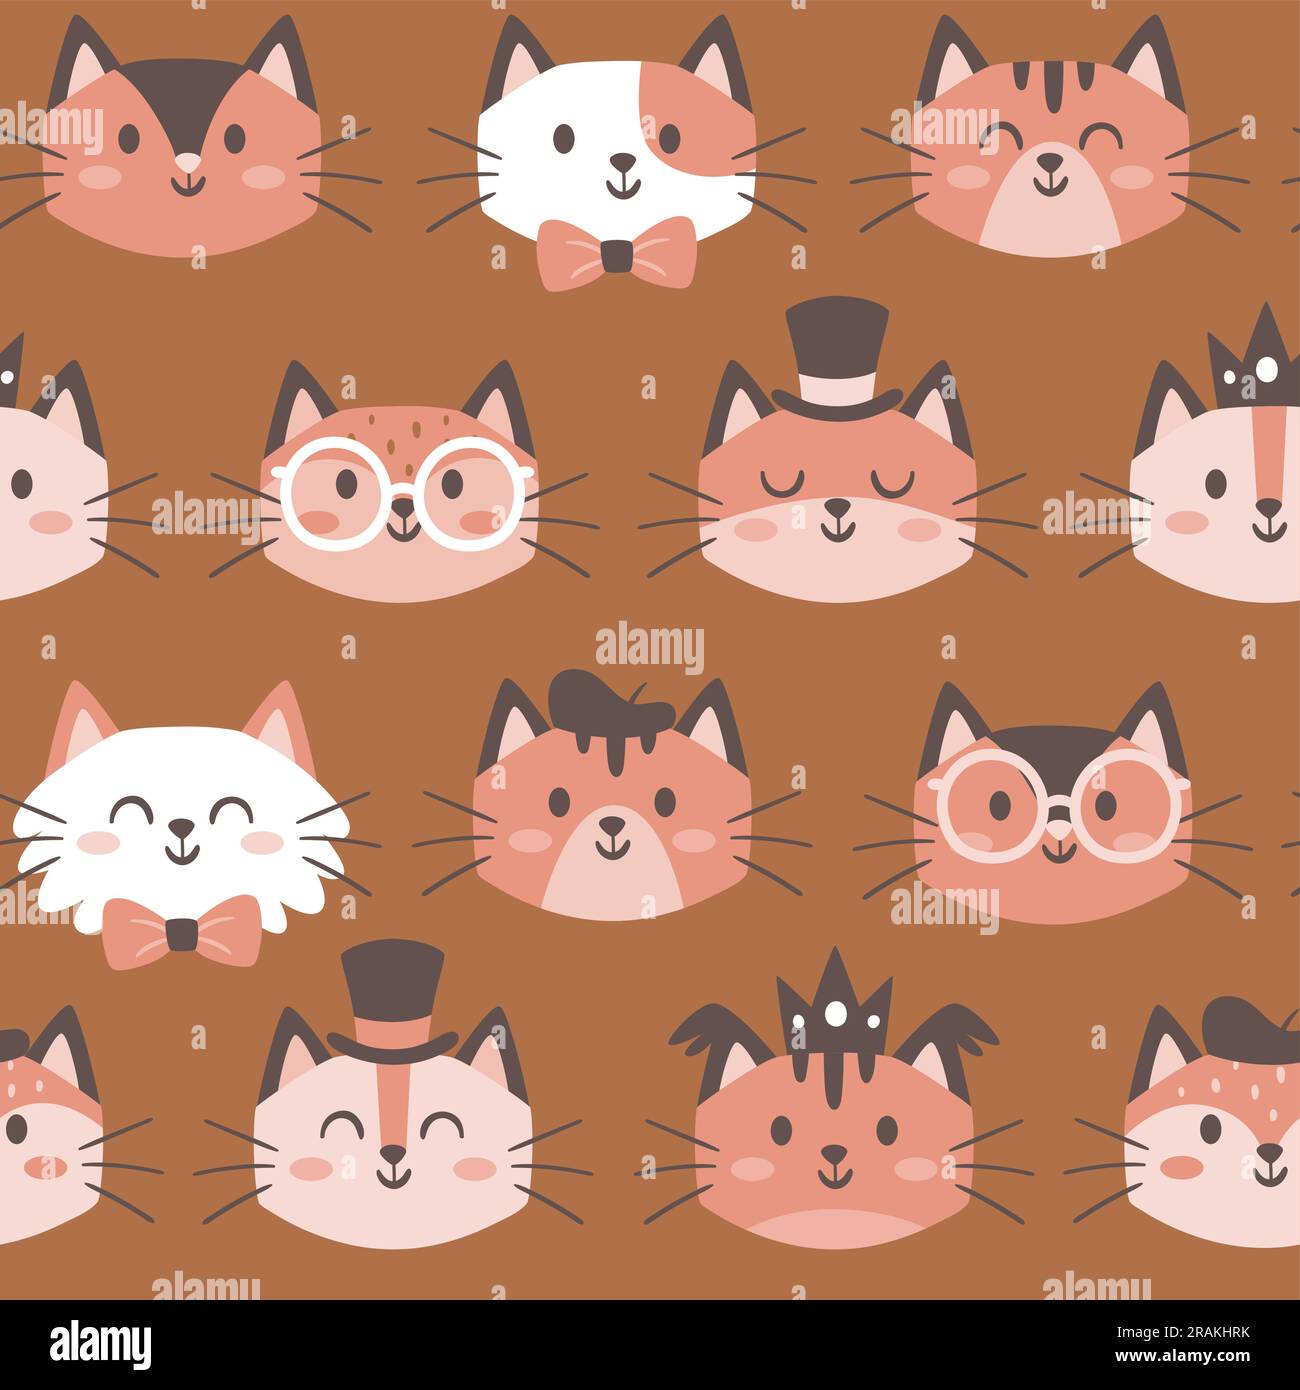 Costume cats seamless pattern. Funny cat faces with accessories like bow ties, hats and glasses. Nursery decoration. Square repeat pattern design. Vec Stock Vector